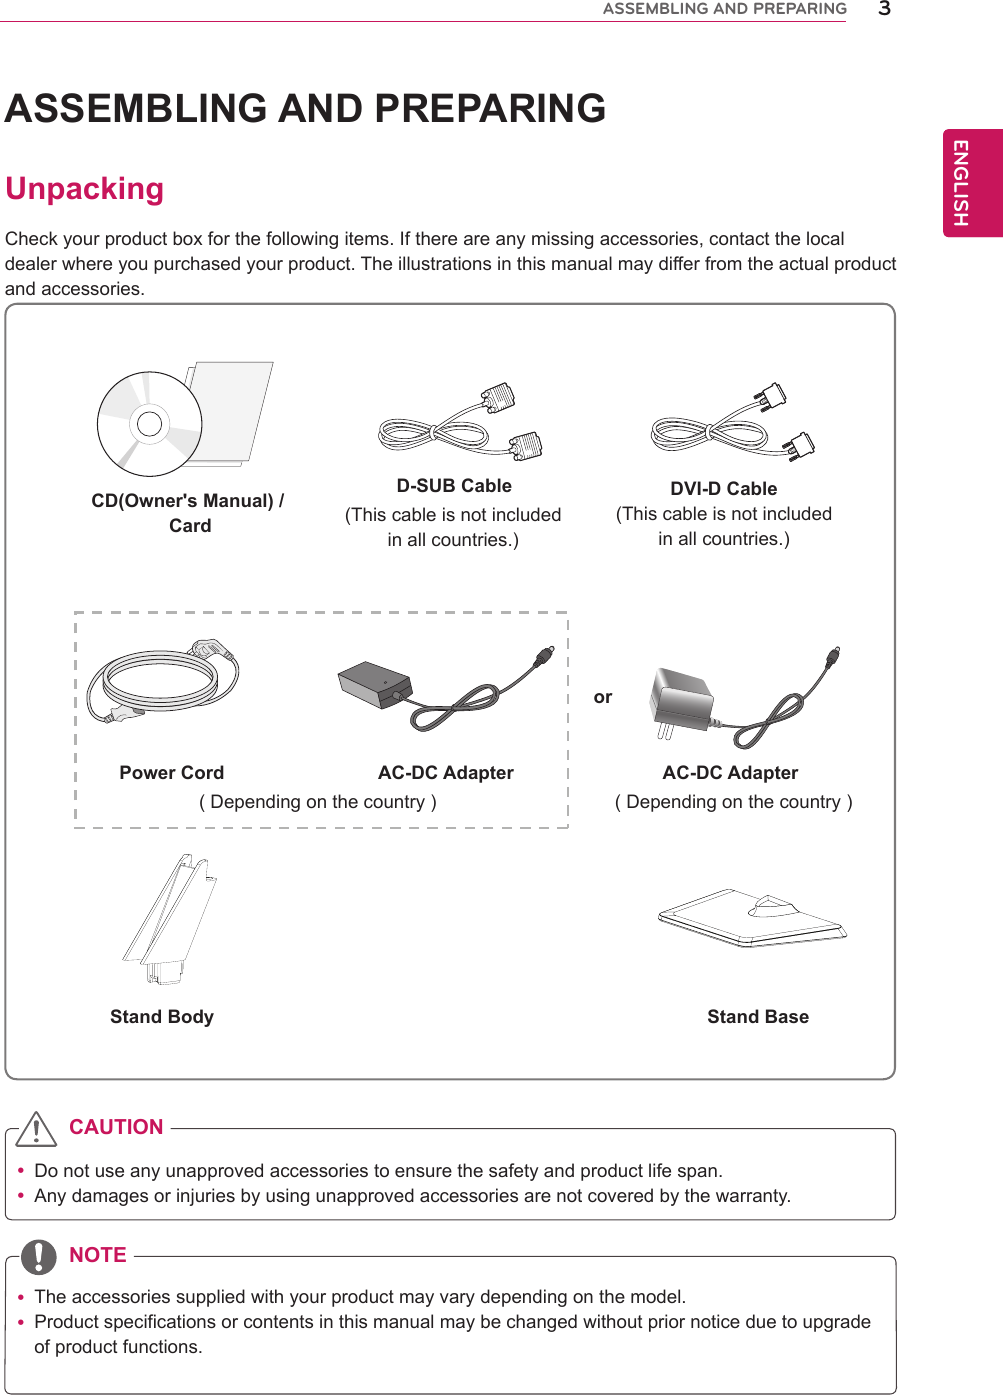 ENGENGLISHASSEMBLING AND PREPARINGUnpackingCheck your product box for the following items. If there are any missing accessories, contact the local dealer where you purchased your product. The illustrations in this manual may differ from the actual product and accessories. yDo not use any unapproved accessories to ensure the safety and product life span. yAny damages or injuries by using unapproved accessories are not covered by the warranty.  yThe accessories supplied with your product may vary depending on the model. yProduct specifications or contents in this manual may be changed without prior notice due to upgrade of product functions.CAUTIONNOTEStand Body Stand BaseCD(Owner&apos;s Manual) / CardDVI-D Cable(This cable is not included in all countries.)( Depending on the country ) ( Depending on the country )Power Cord AC-DC Adapter AC-DC Adapteror D-SUB Cable(This cable is not included in all countries.)3ASSEMBLING AND PREPARING